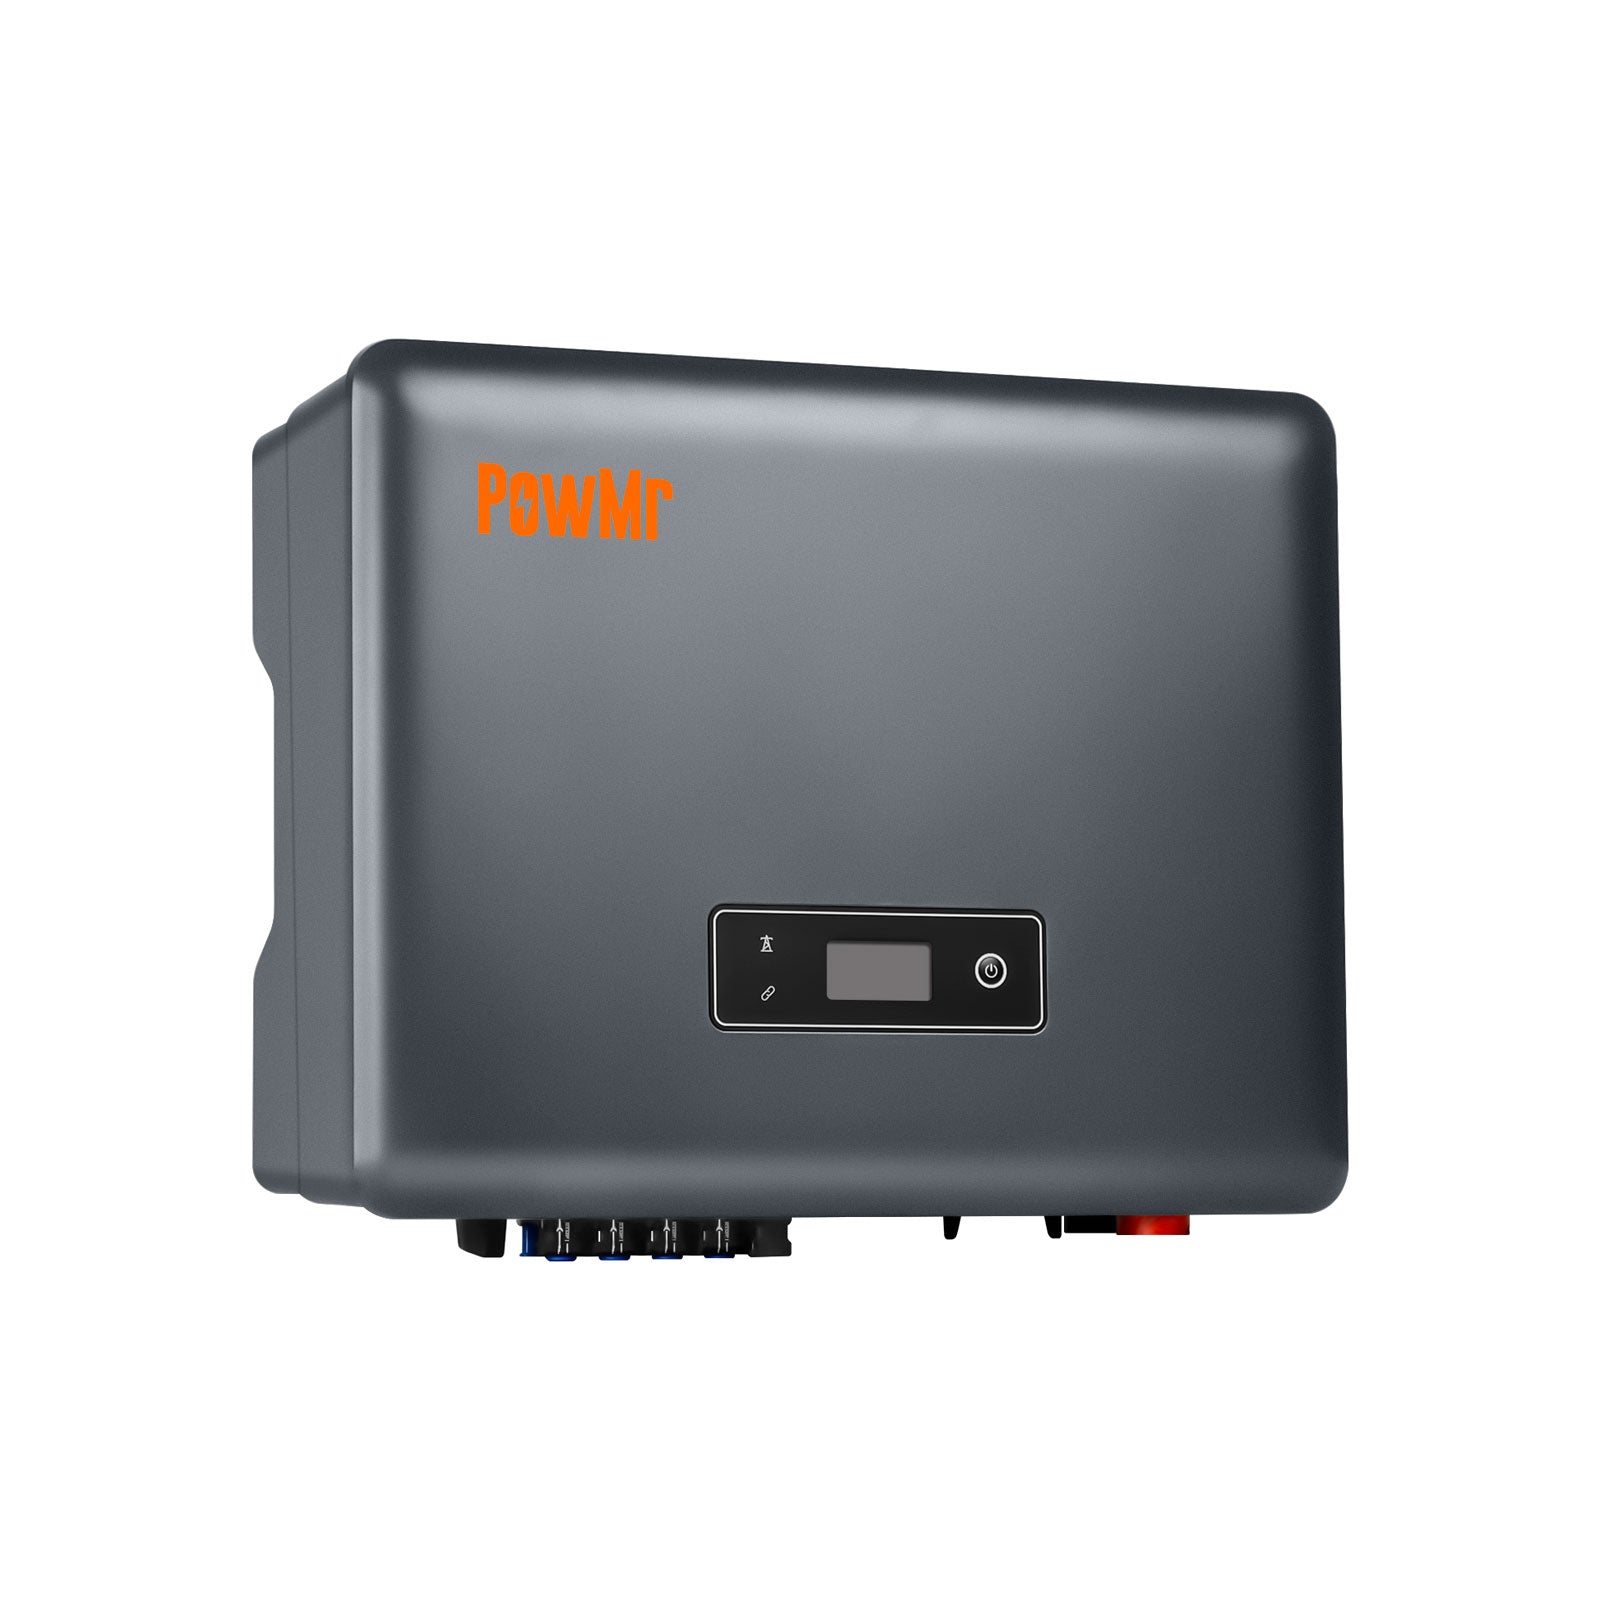 SOLXPOW X3 Series 15KW Three-Phase HV Battery 2 MPPTs Commercial Storage Inverter